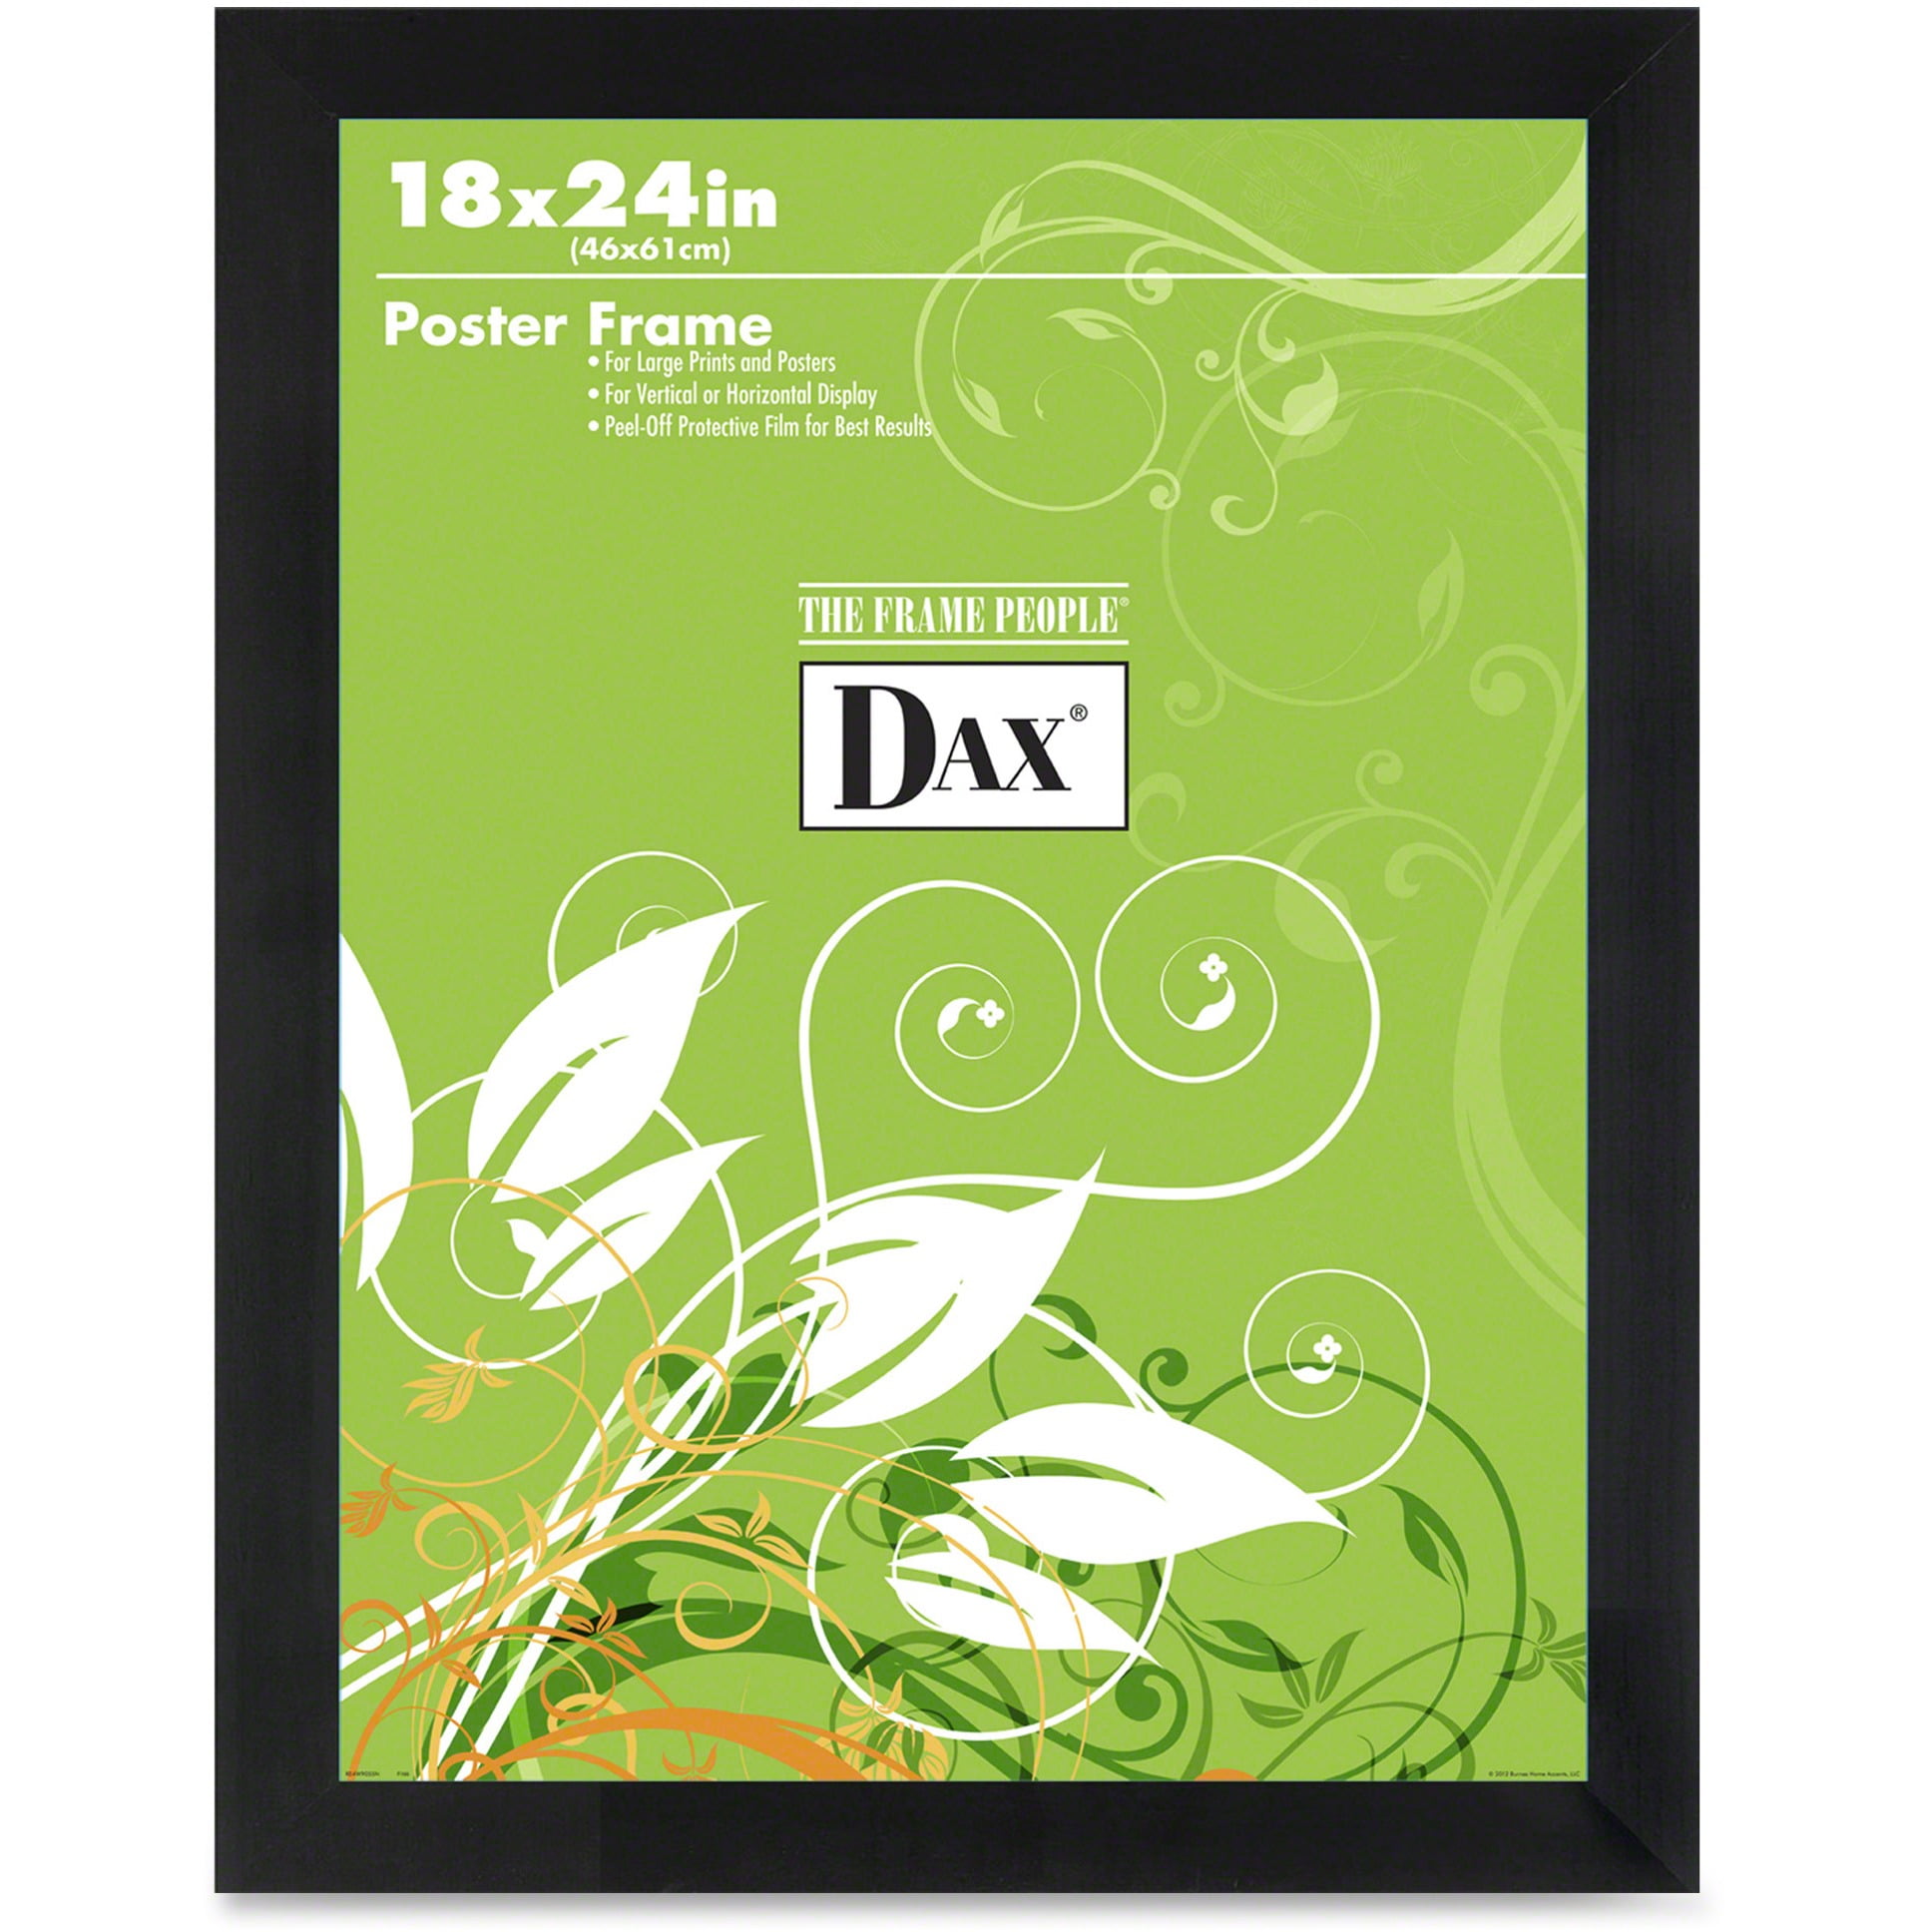 Details about   Dax Flat Face Wood Poster Frame Clear Plastic Window 18 x 24 Black Border 